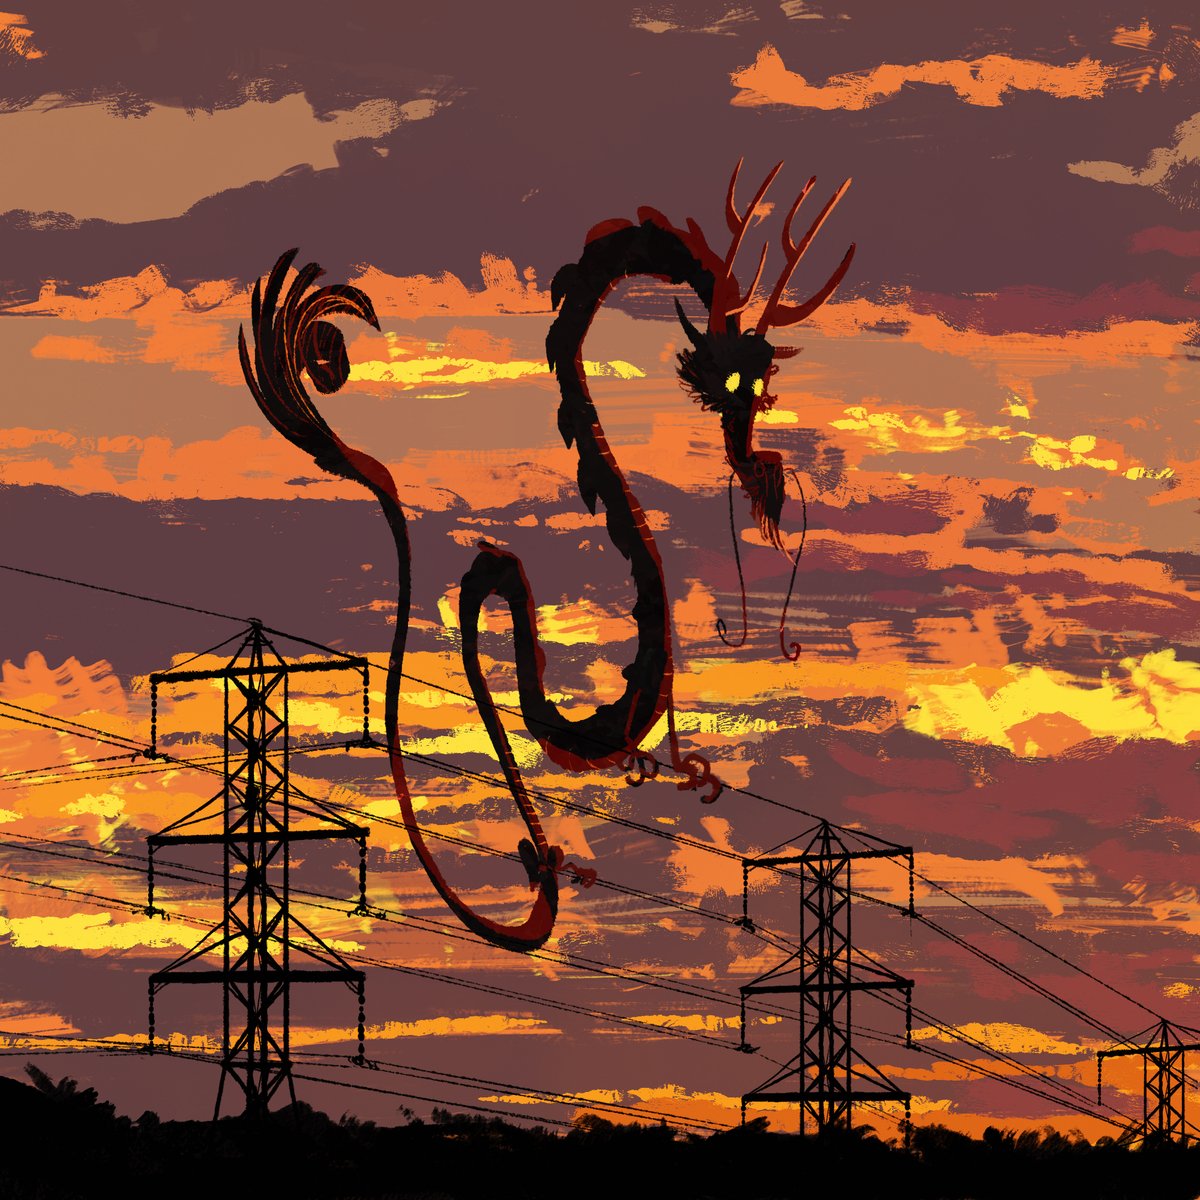 Perched (still using dragons as an excuse to practice some landscapes, man-made structures etc.)